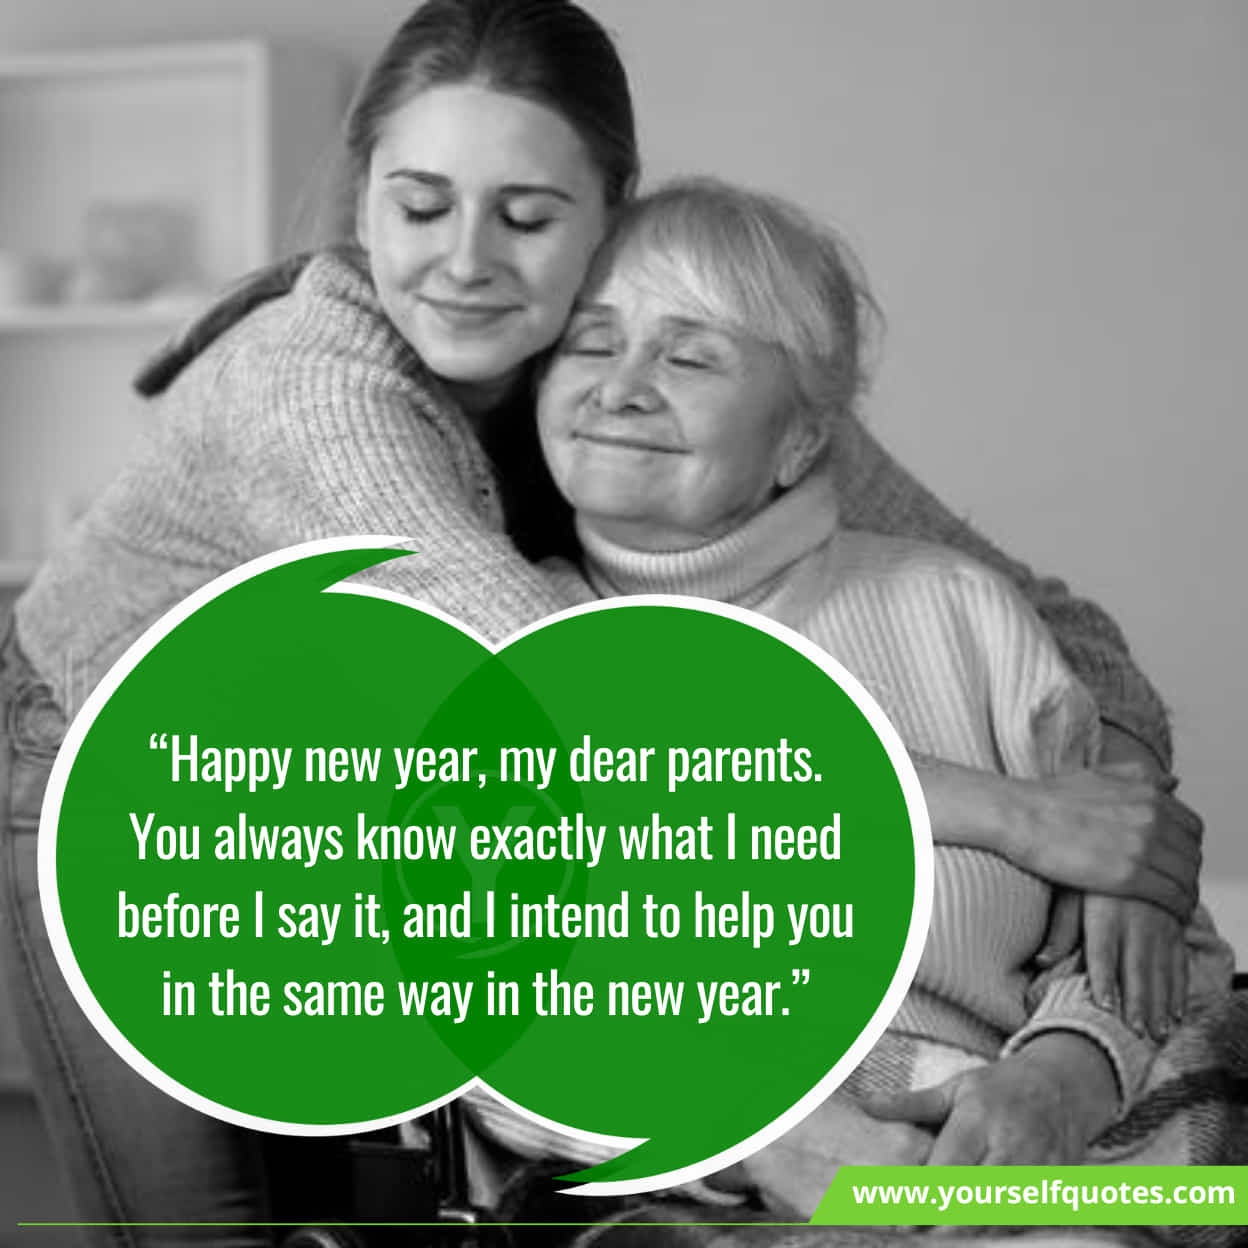 Latest Humble Wishes On New Year for Parents